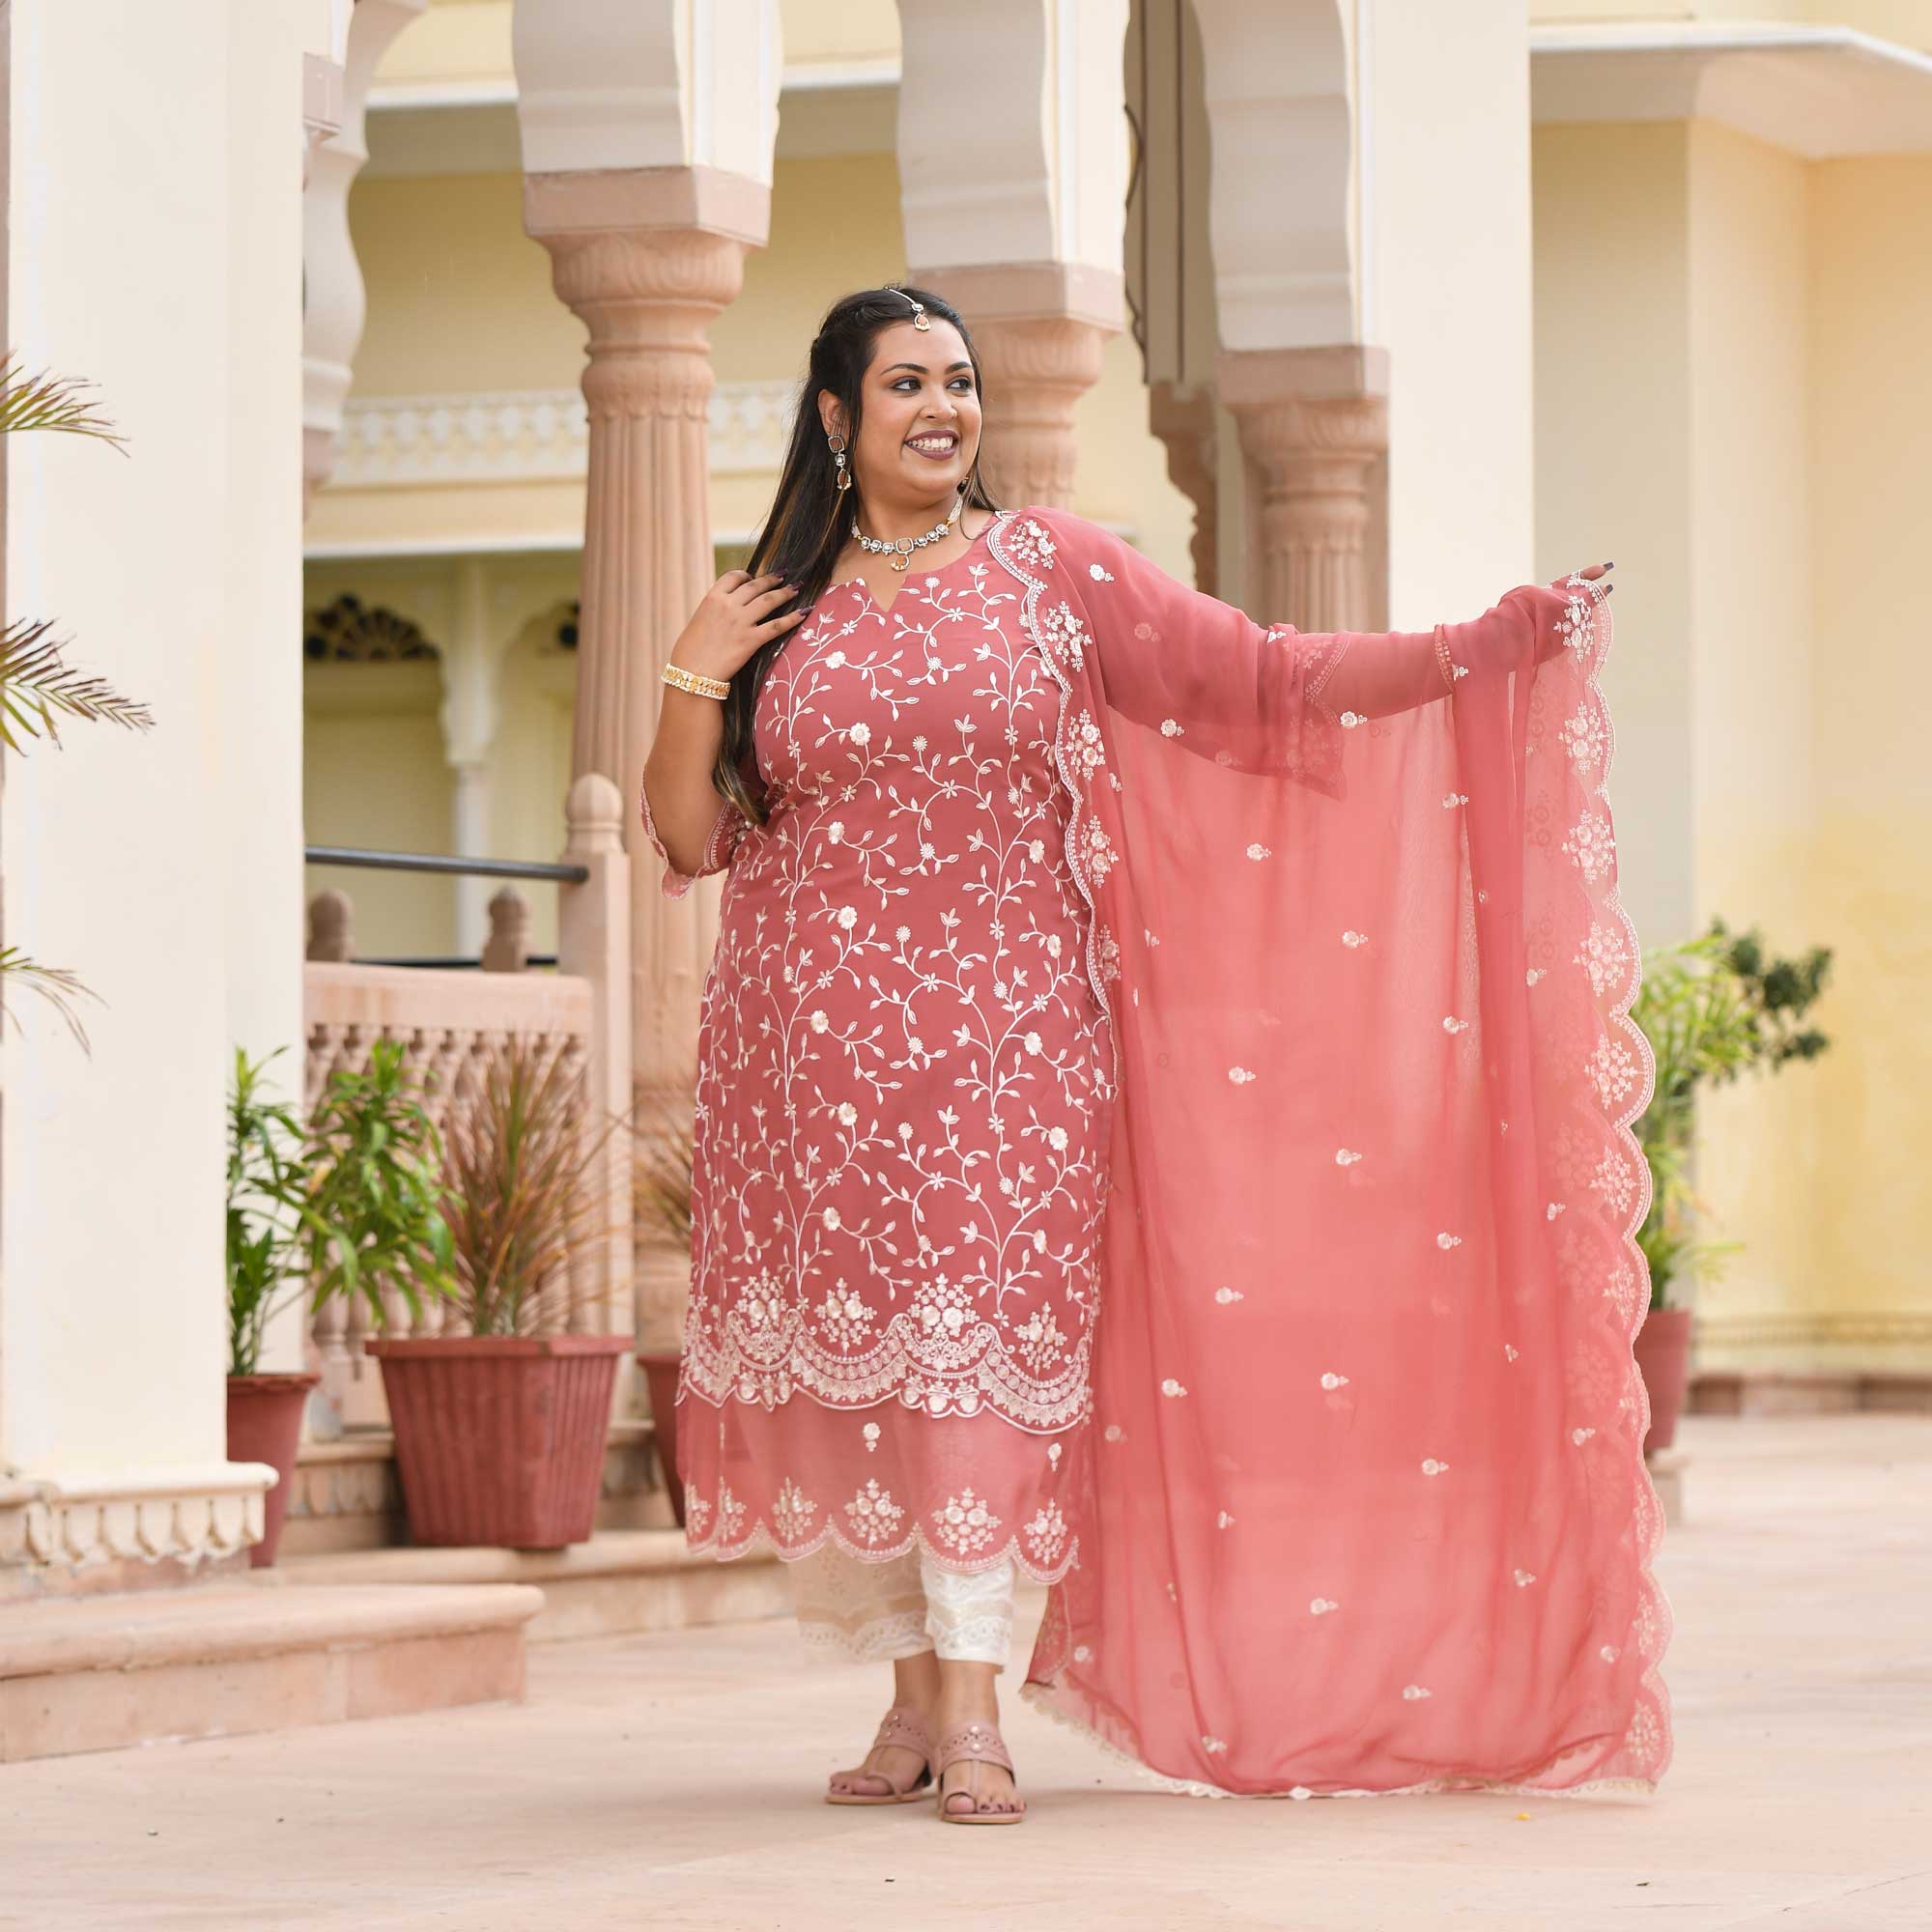 Pearl White & Pink Melody Thread Embroidered Organza Suit Set-Plus Size  Clothing(XS-10XL)